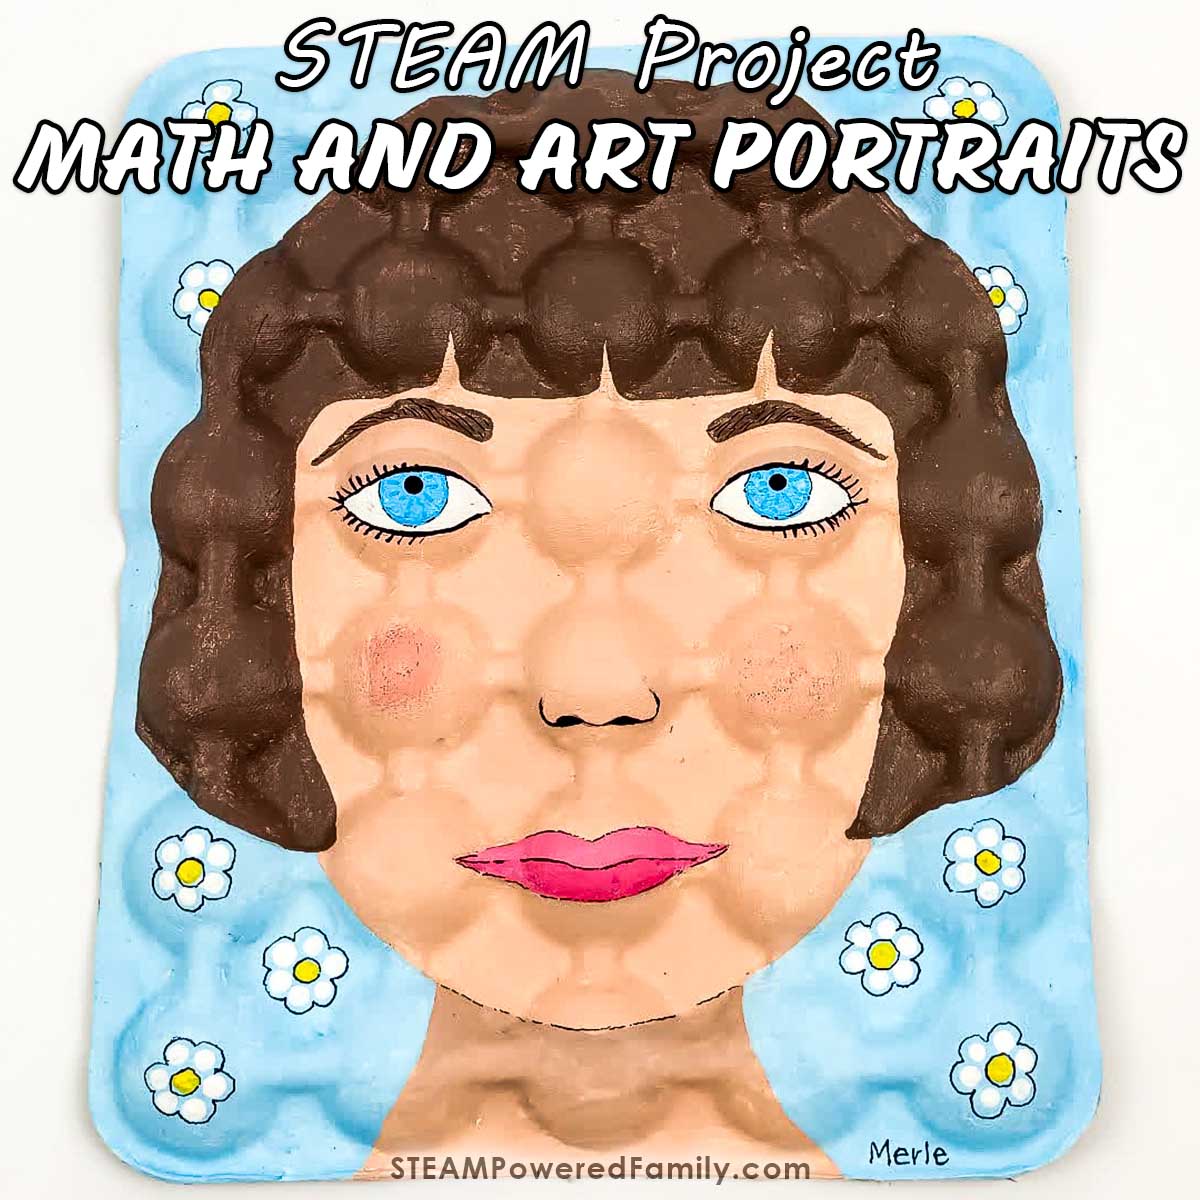 STEAM Self Portrait Project – Hands On Math and Art